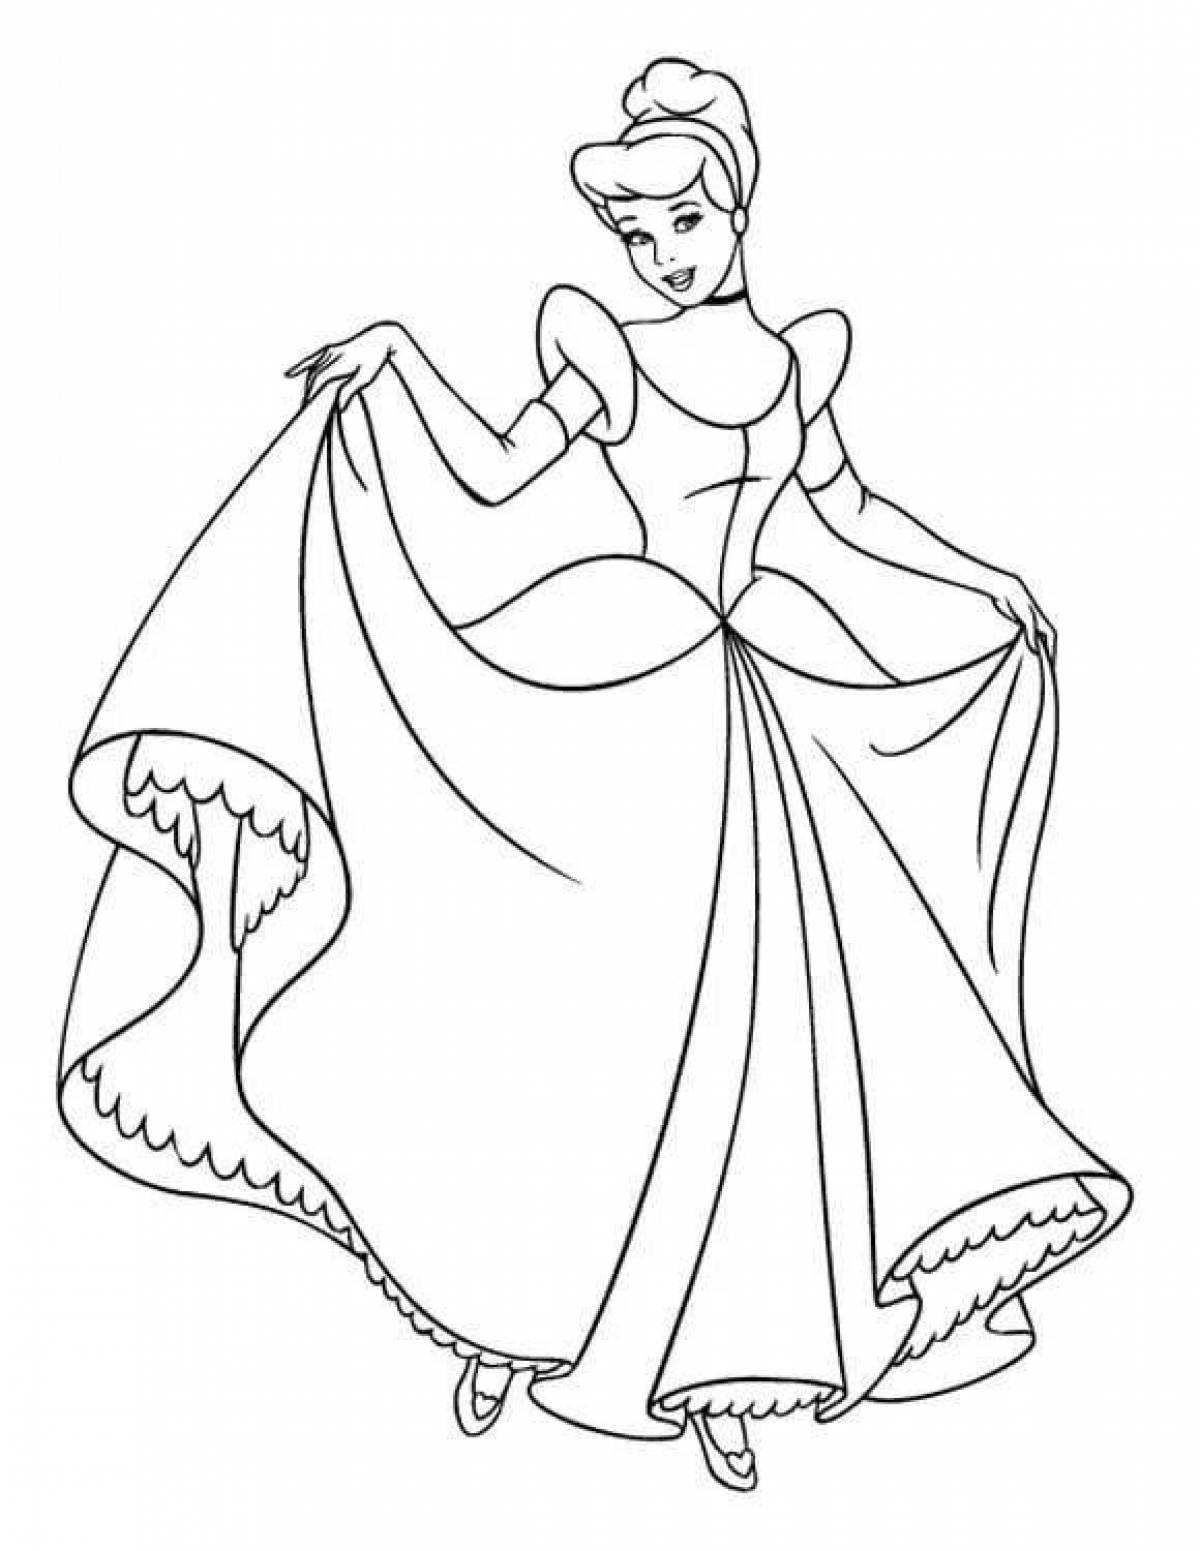 Amazing Cinderella coloring book for kids